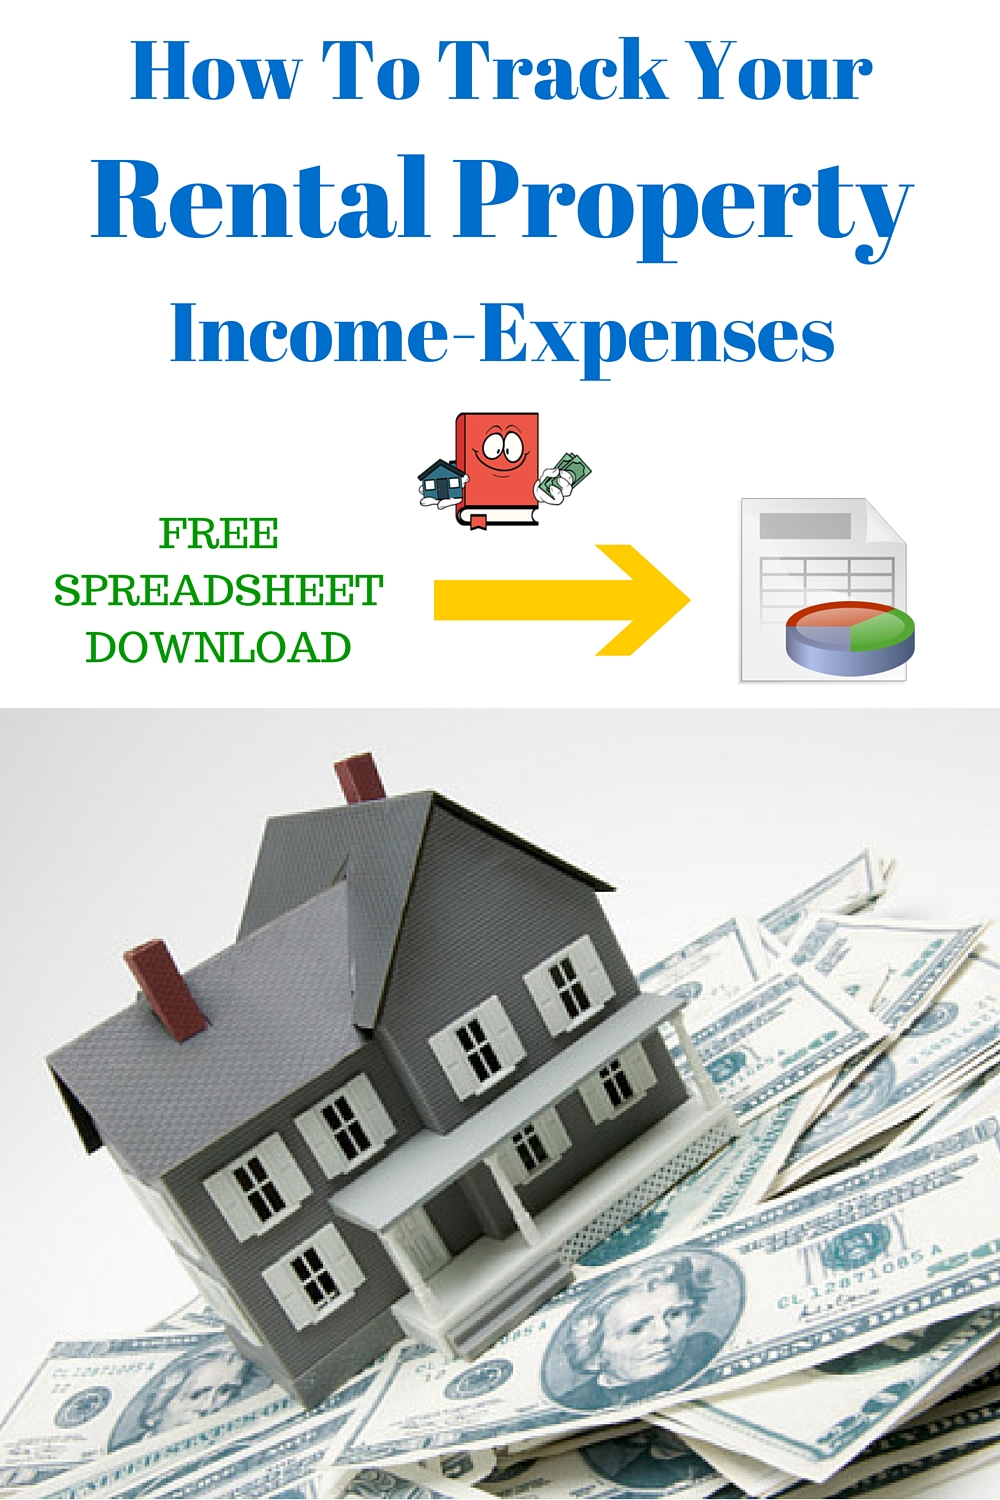 Rental House Expenses Spreadsheet Inside How To Keep Track Of Rental Property Expenses